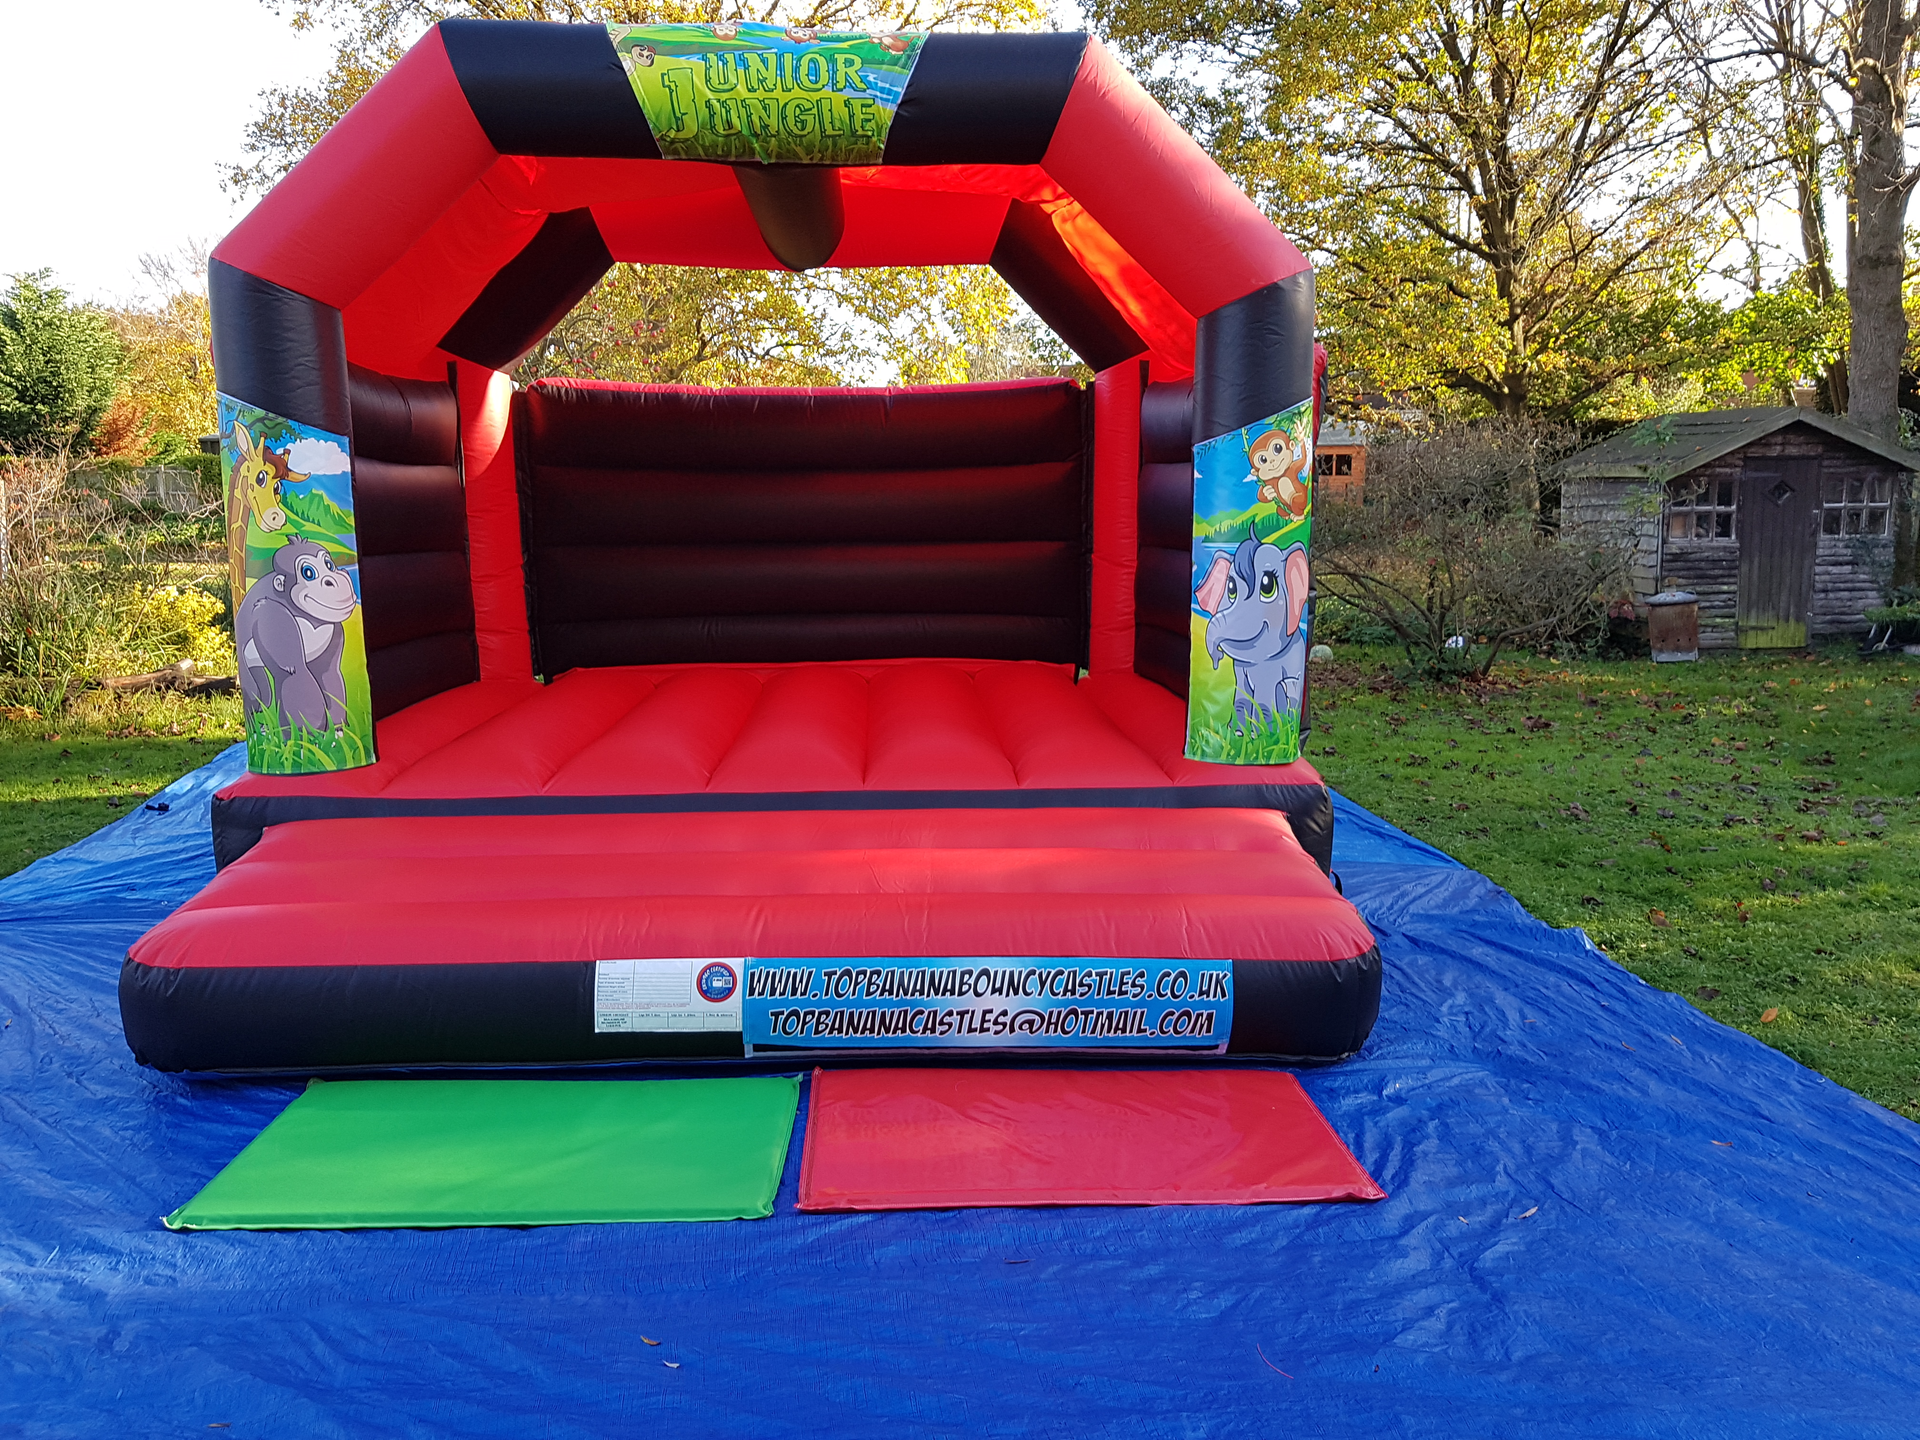 red and black adult bouncy castle with jungle artwork